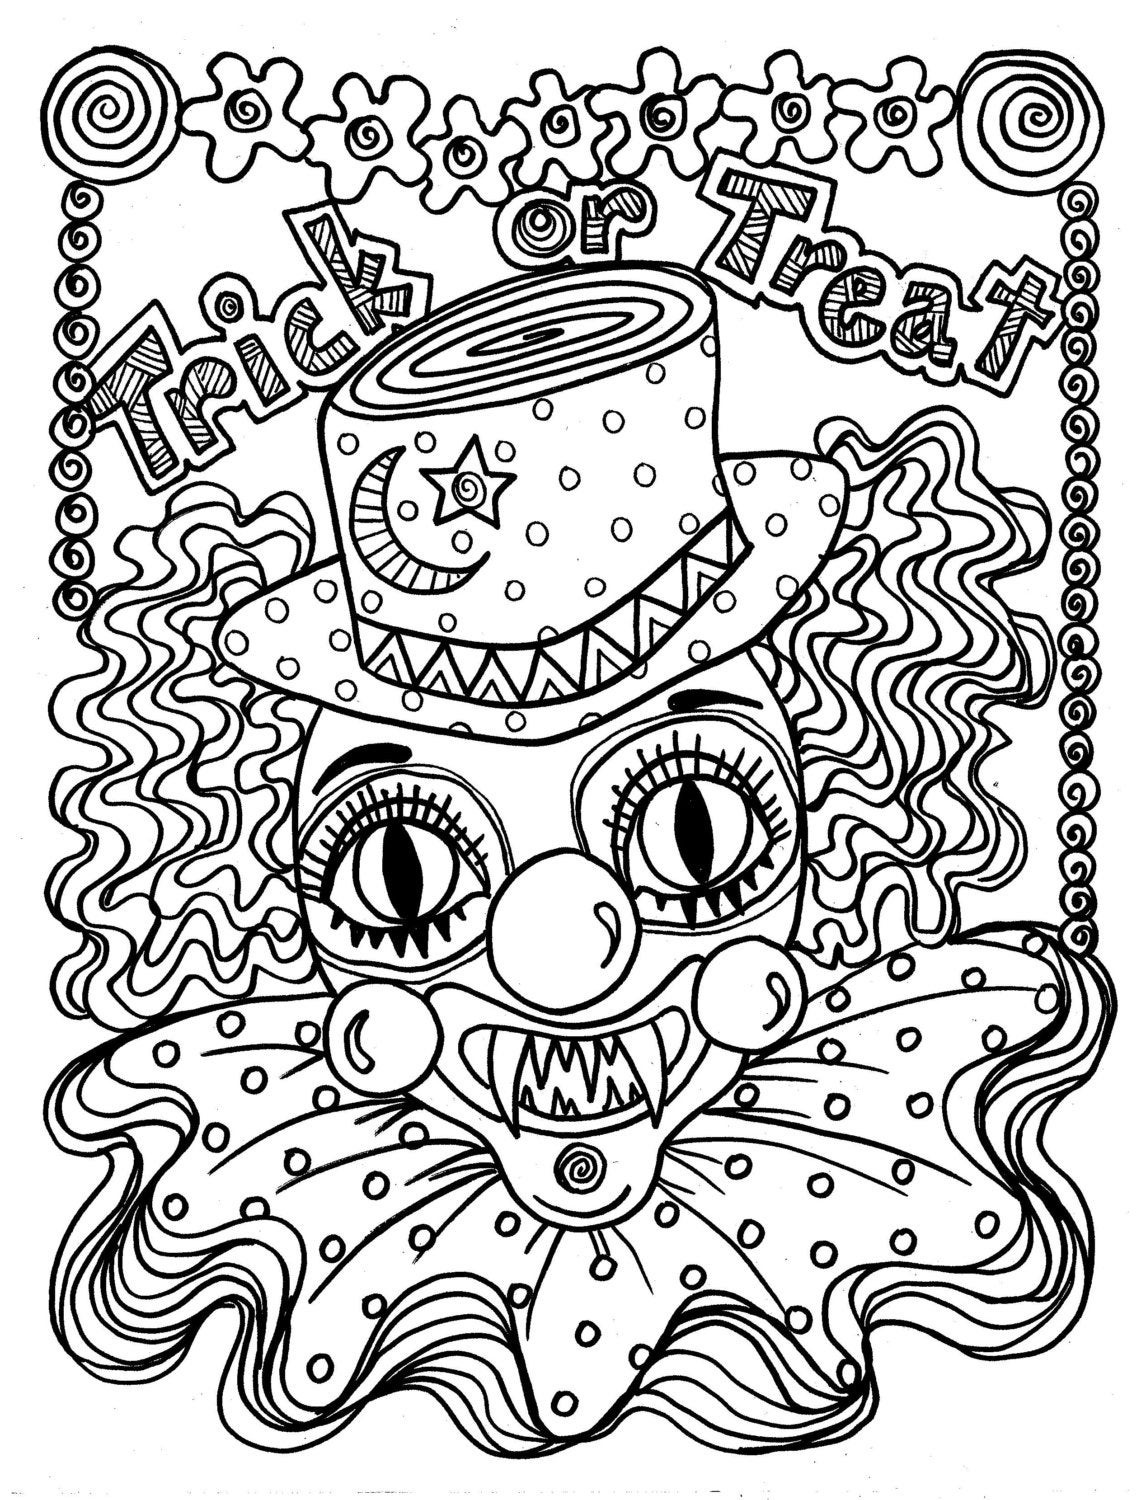 Horror Coloring Pages For Adults
 Instant Download Scary Clown Halloween Spooky Coloring page